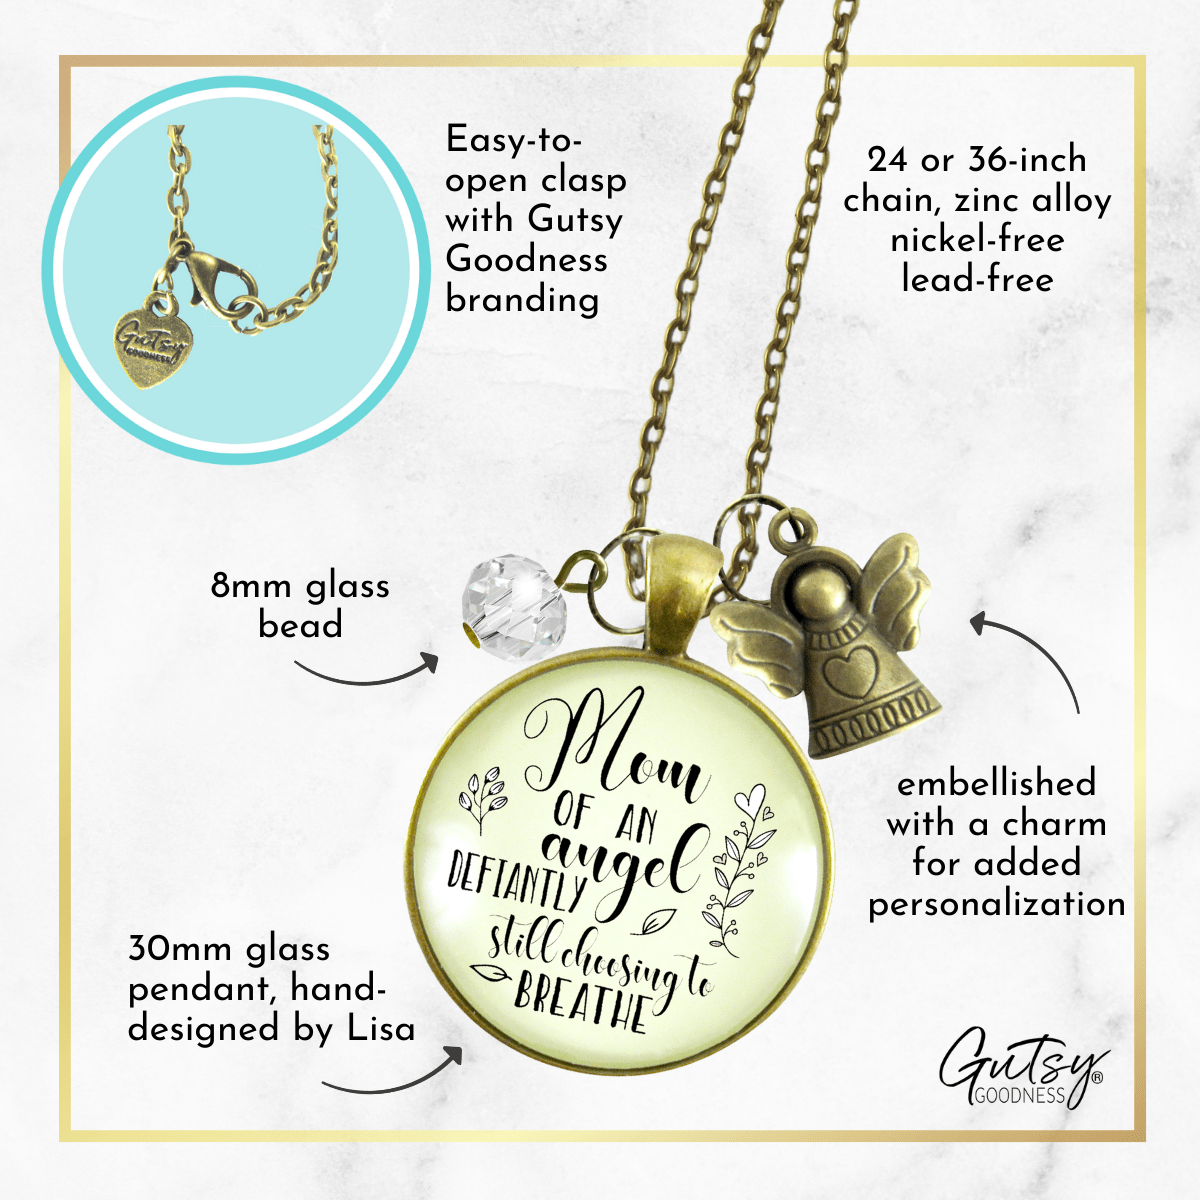 Gutsy Goodness Child's Remembrance Memorial Necklace Mom of an Angel Sympathy Gift - Gutsy Goodness Handmade Jewelry;Child's Remembrance Memorial Necklace Mom Of An Angel Sympathy Gift - Gutsy Goodness Handmade Jewelry Gifts